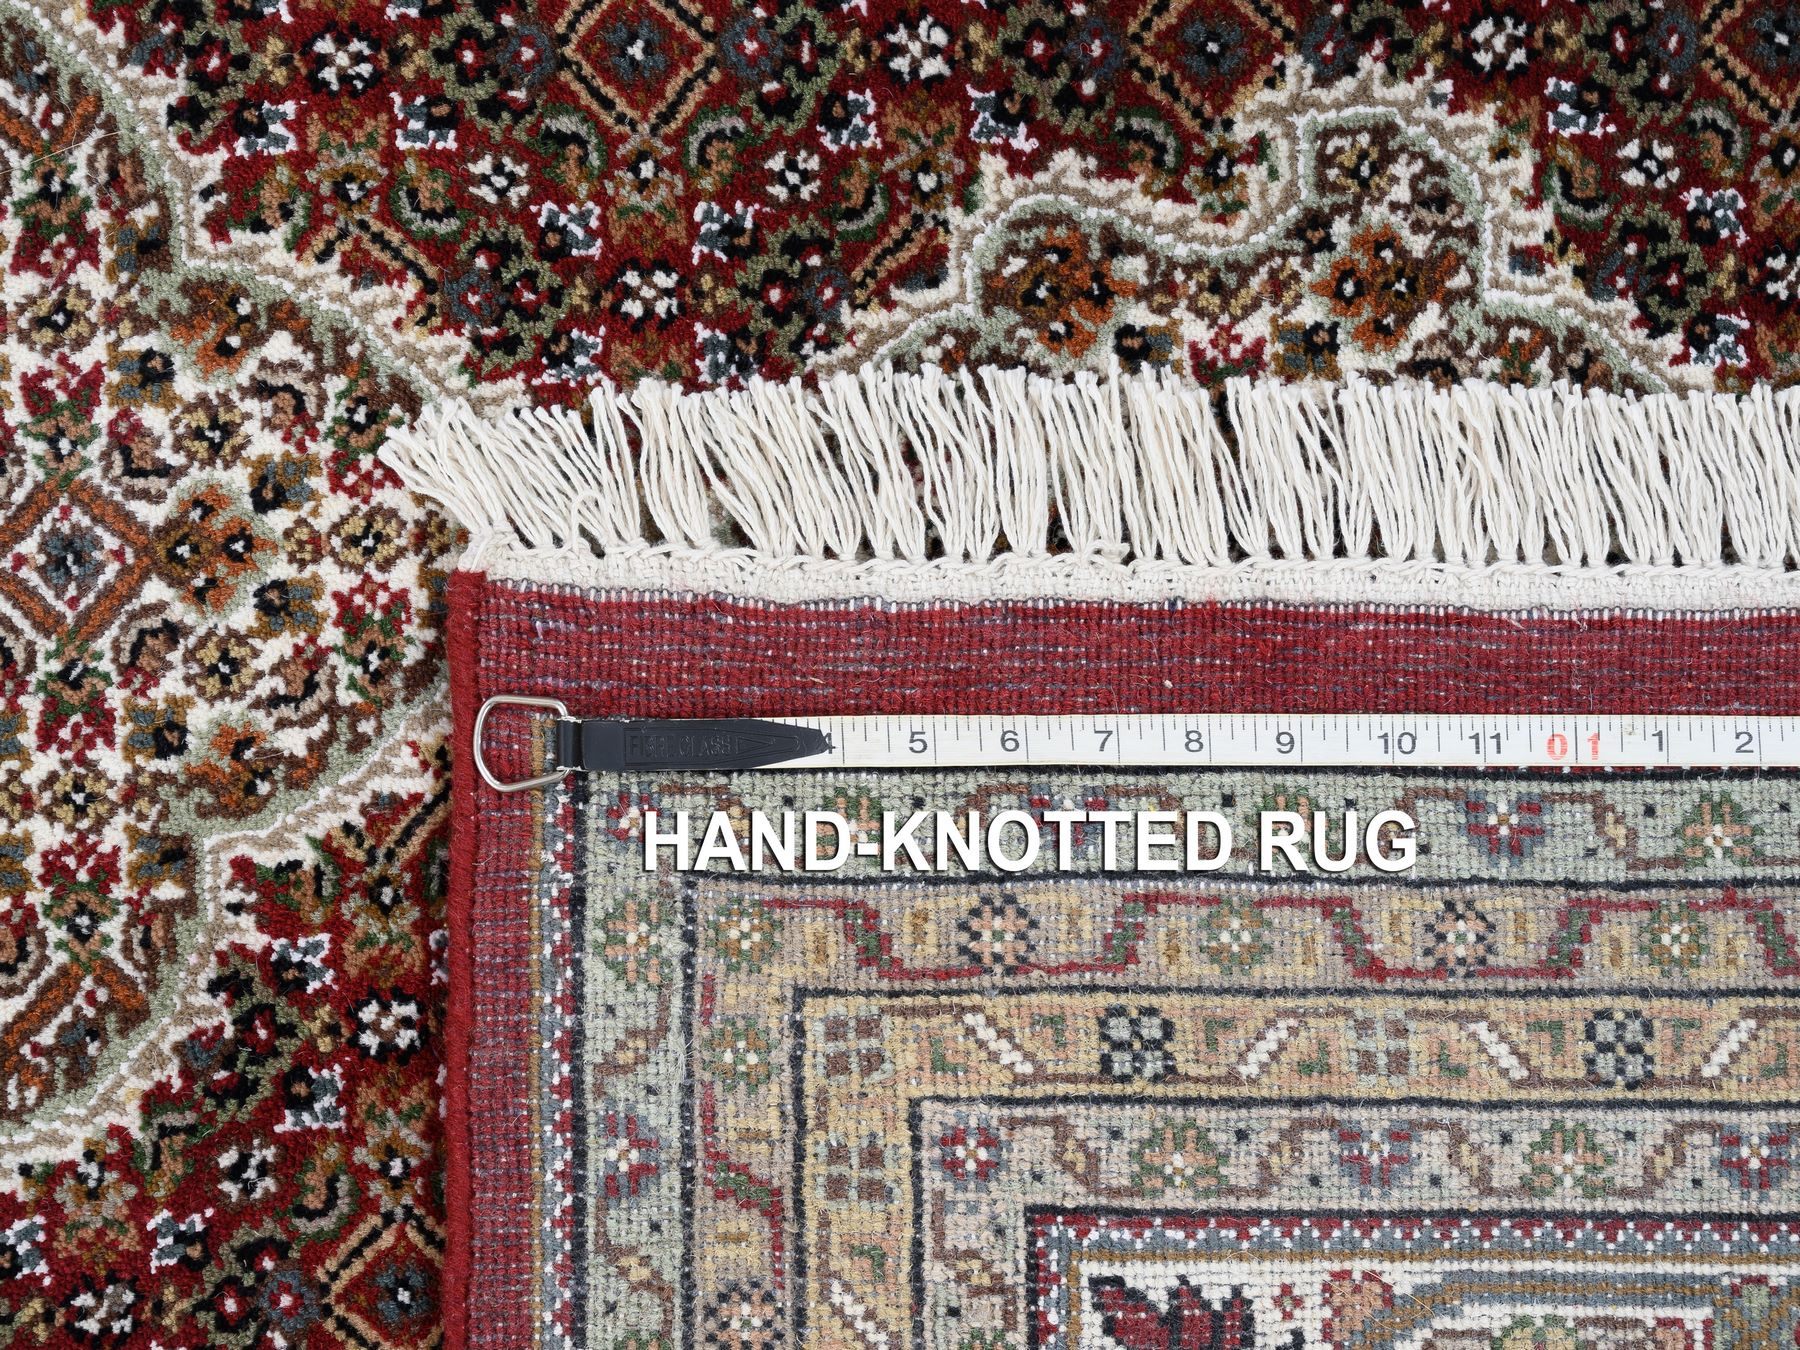 Traditional Rugs LUV569583